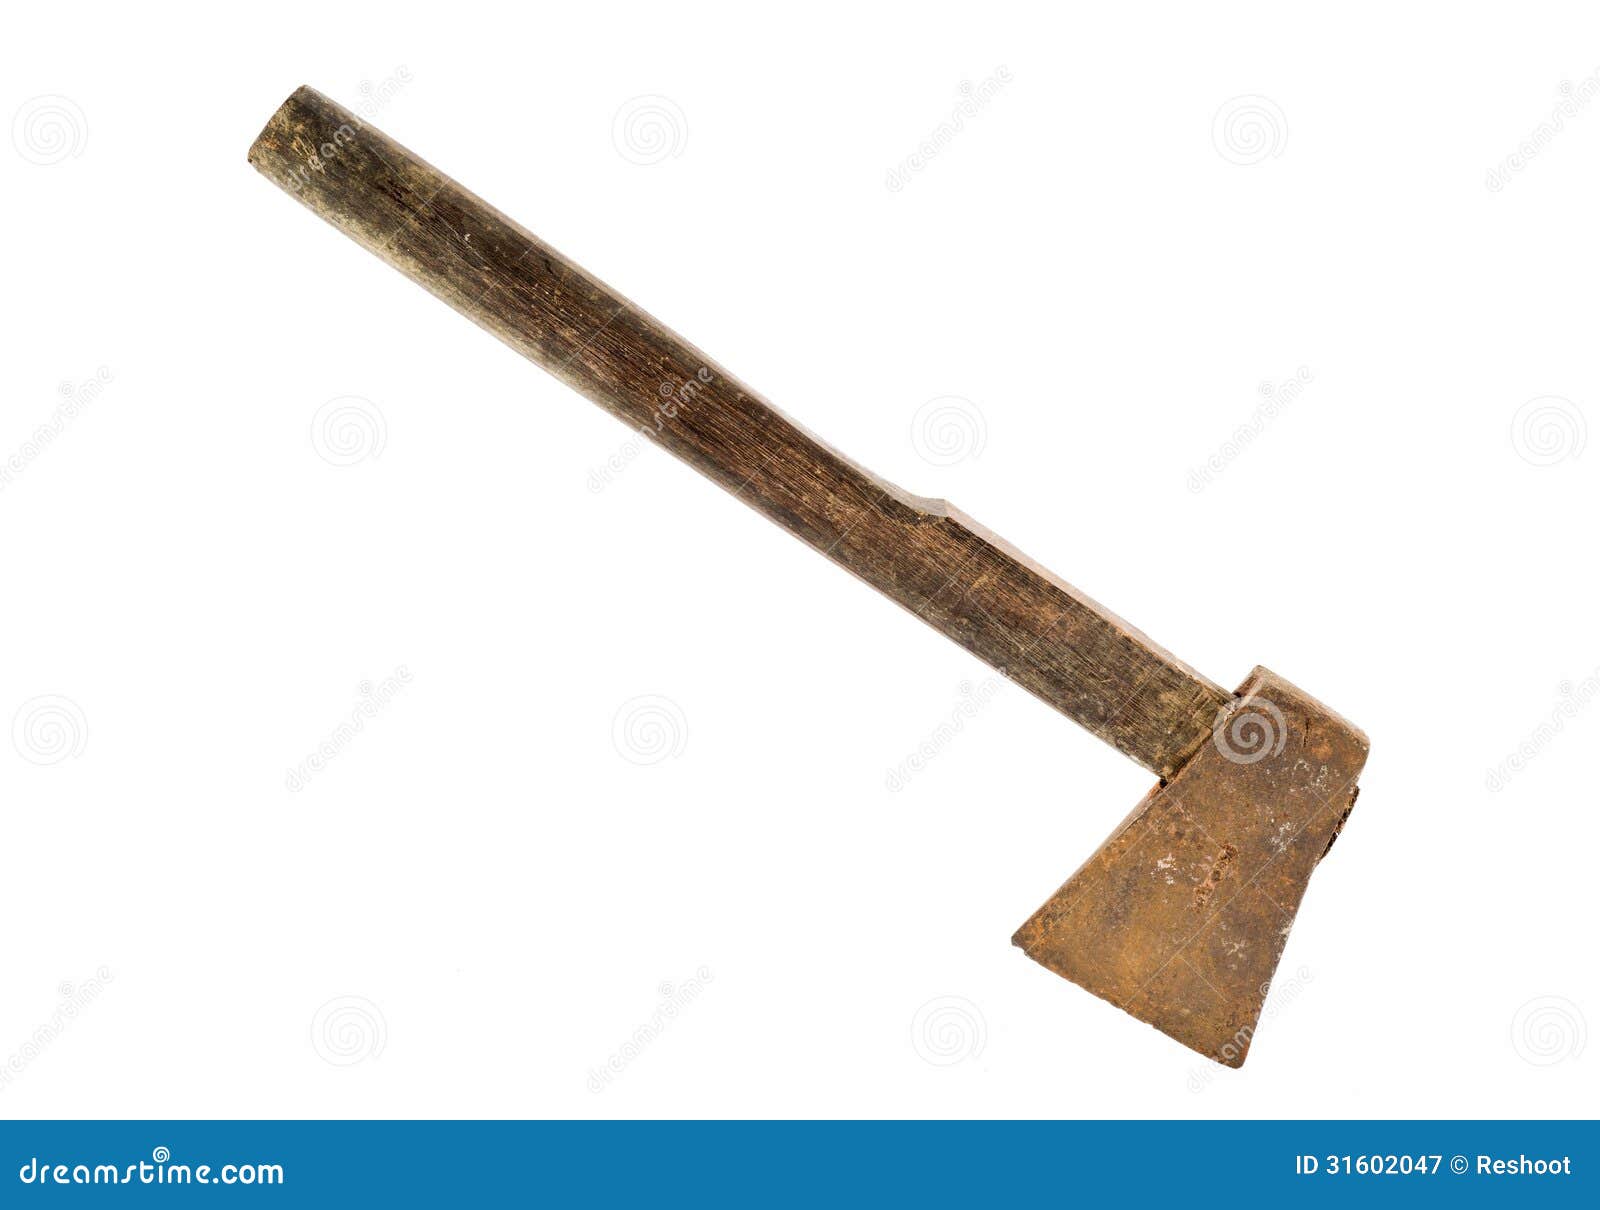 Rusty axe stock image. Image of chopper, isolated, antique - 31602047